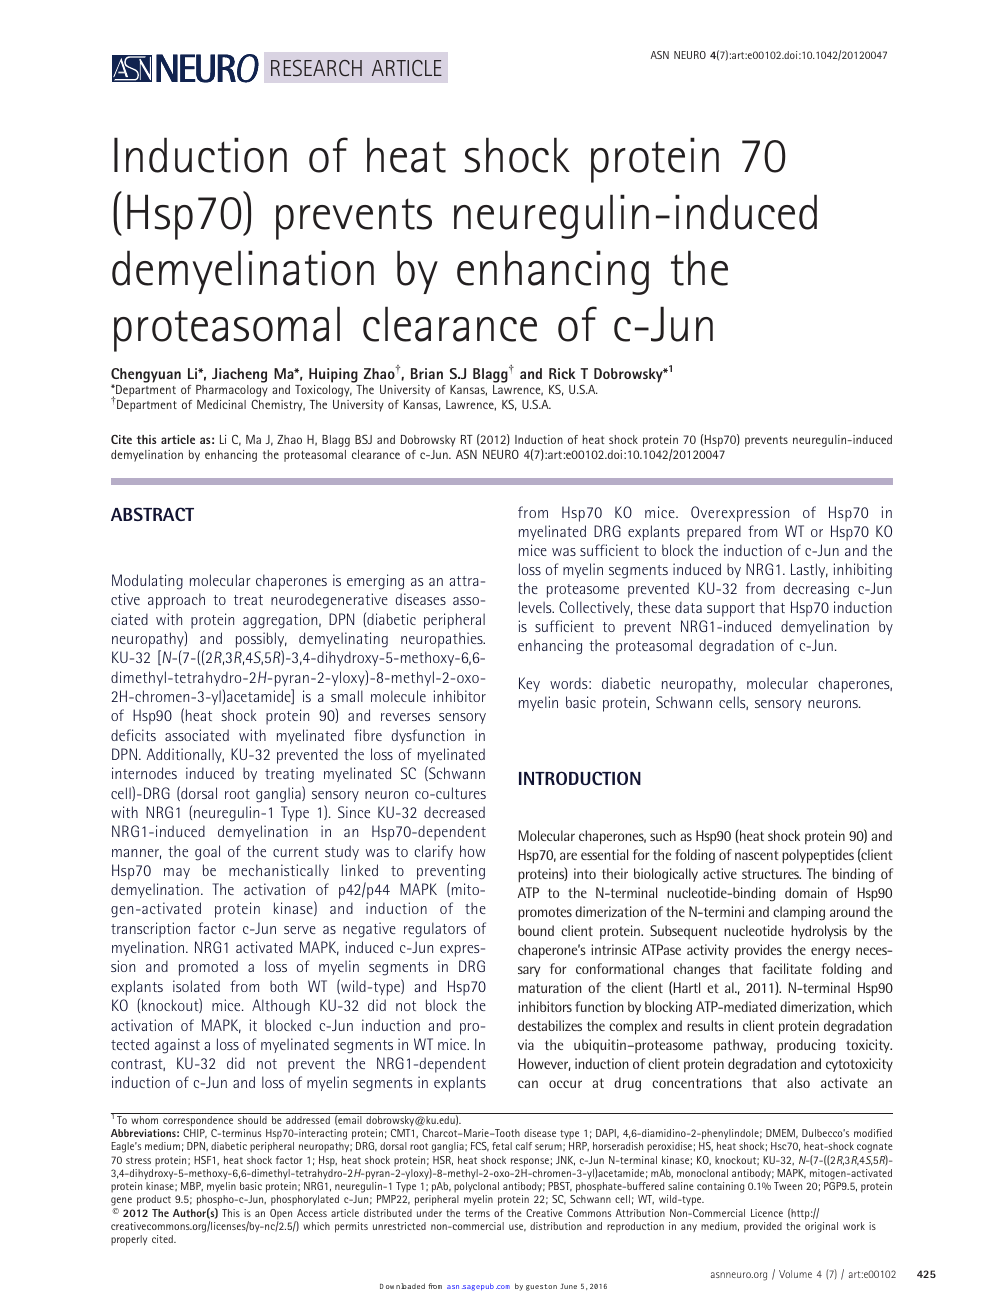 Induction Of Heat Shock Protein 70 Hsp70 Prevents Neuregulin Induced Demyelination By Enhancing The Proteasomal Clearance Of C Jun Topic Of Research Paper In Biological Sciences Download Scholarly Article Pdf And Read For